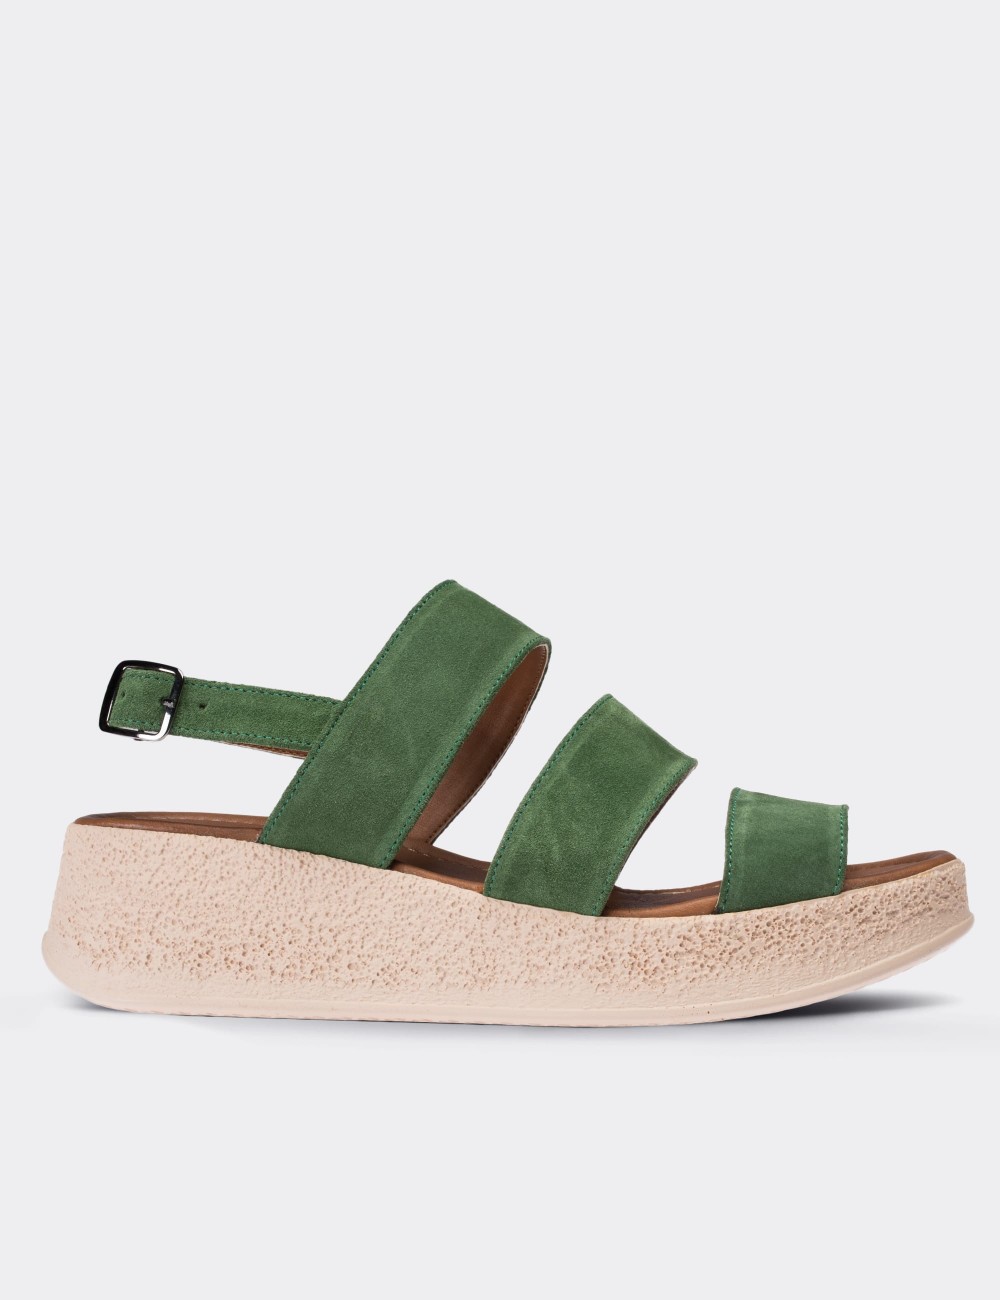 Green Suede Leather  Sandals - 02123ZYSLP01